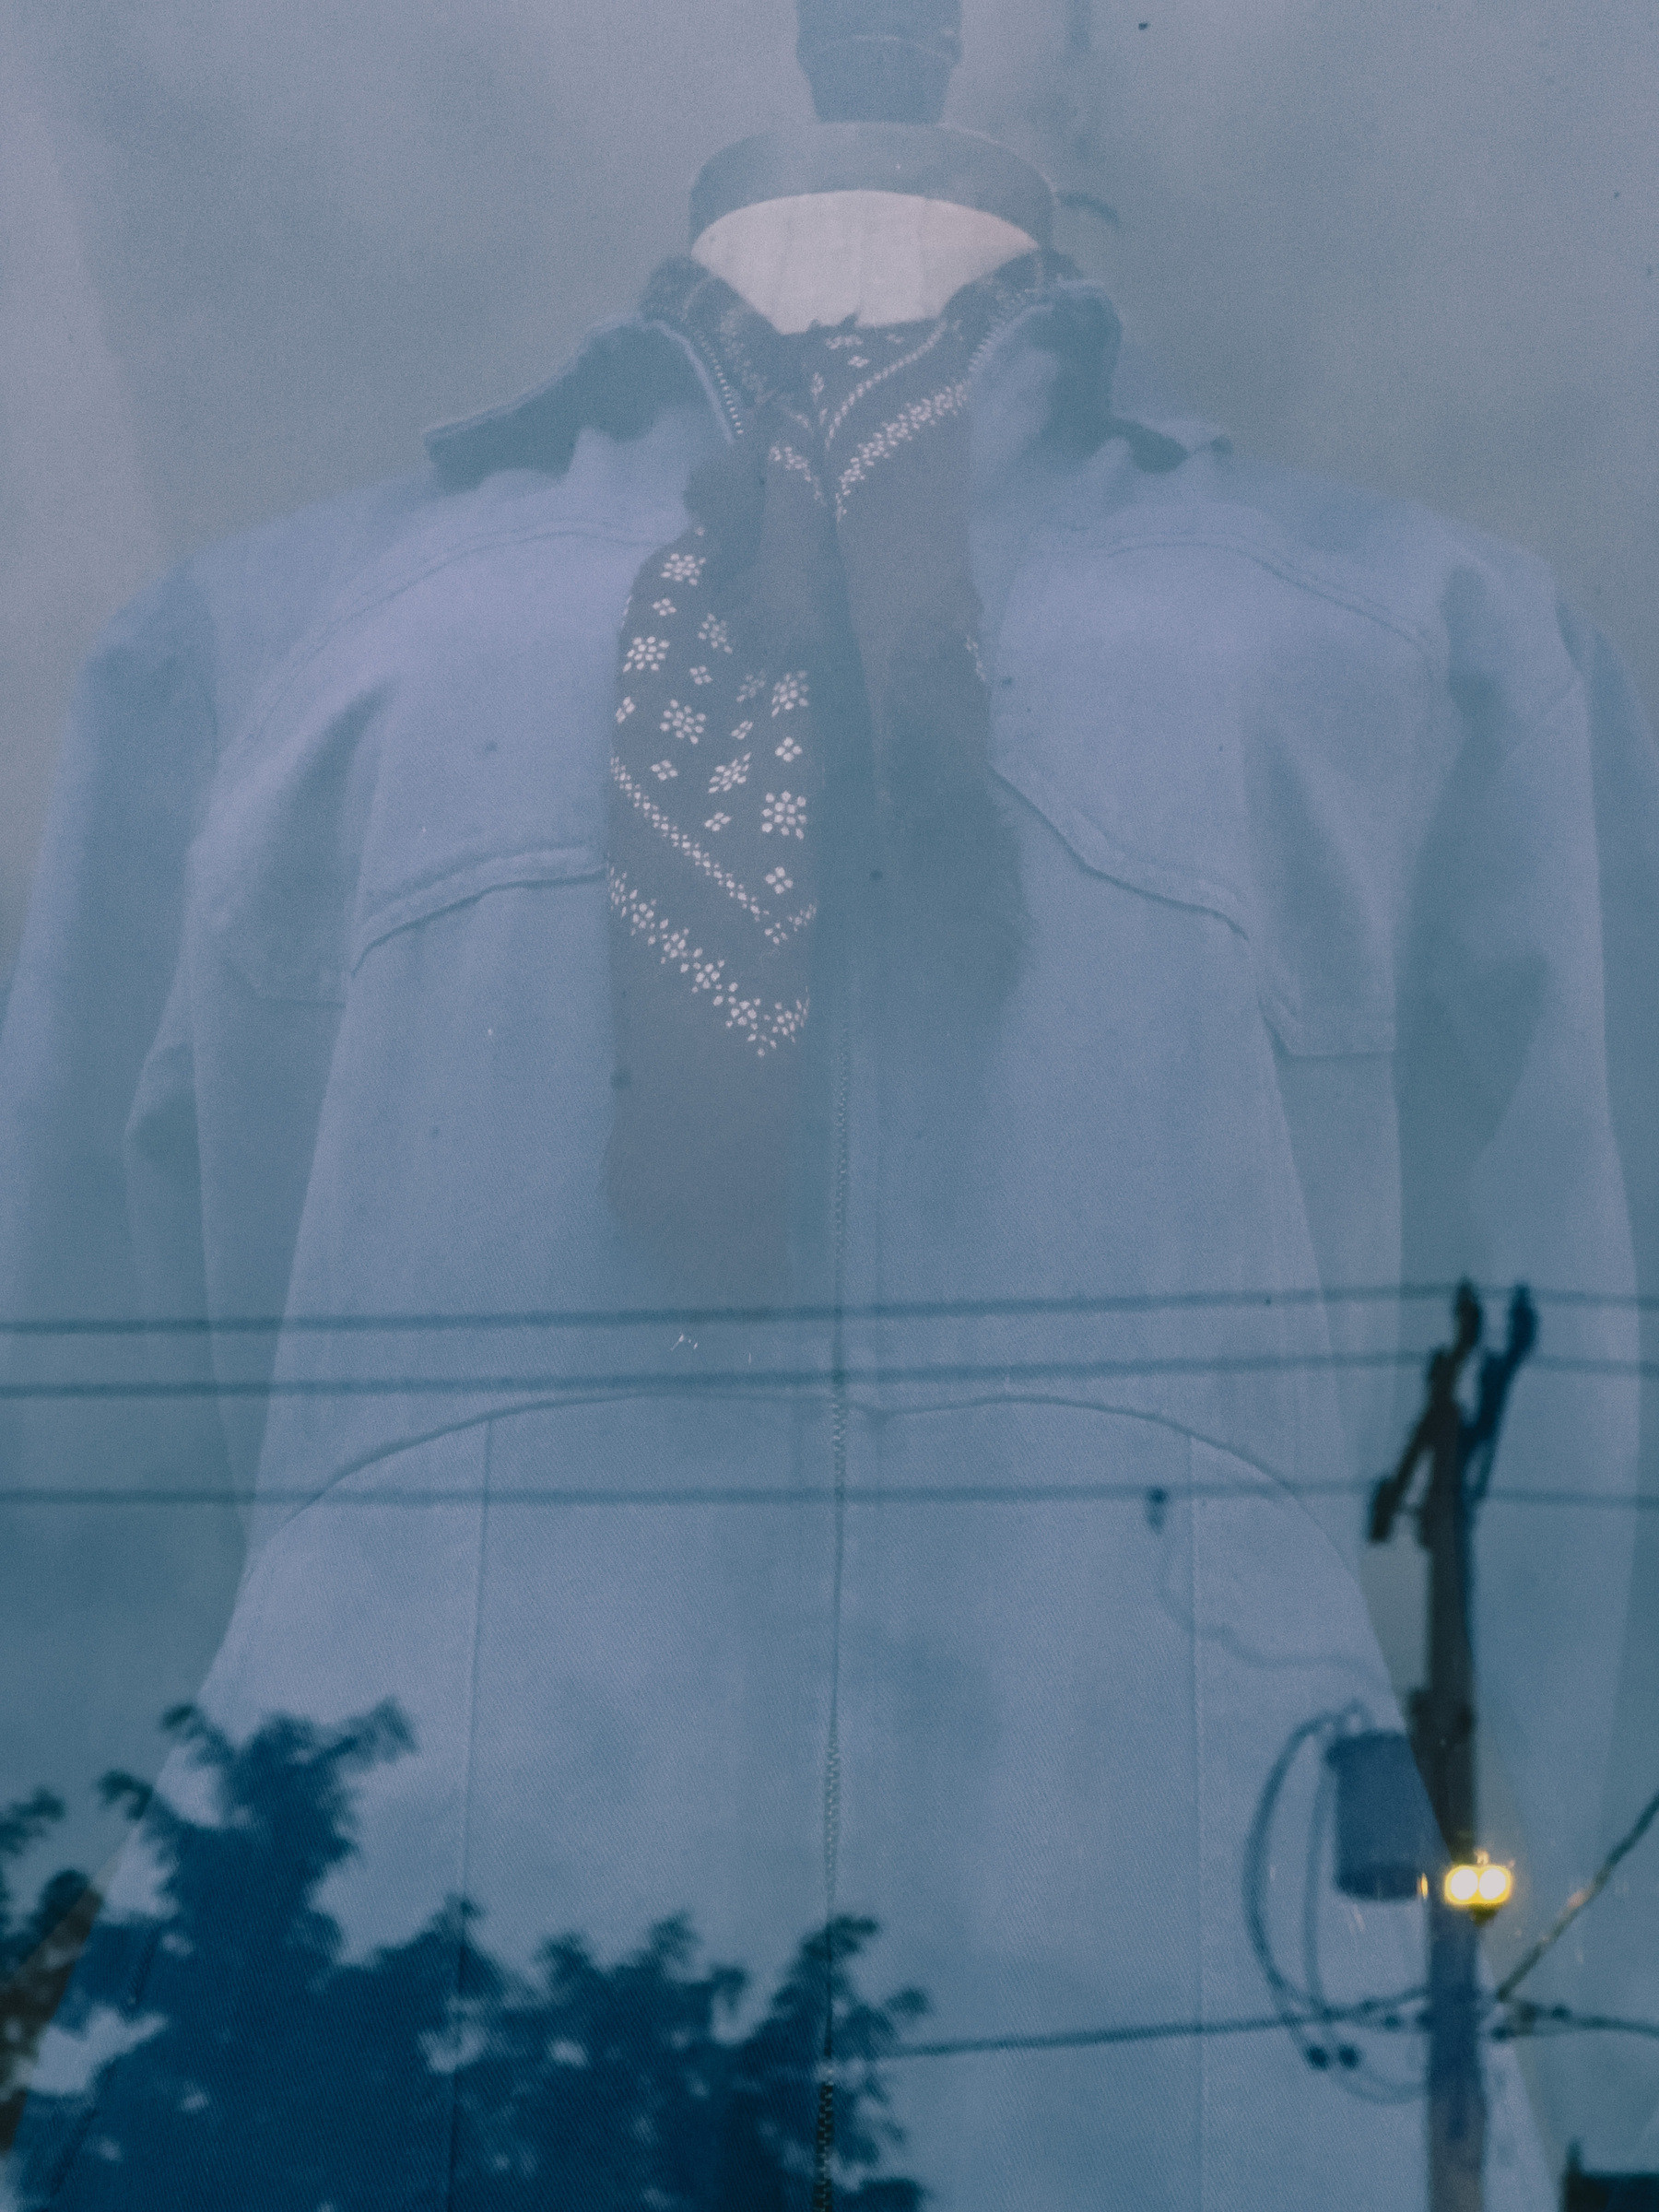 Women’s blue jumpsuit and neck scarf on mannequin with reflections of trees, utility pole and wires overlaid.